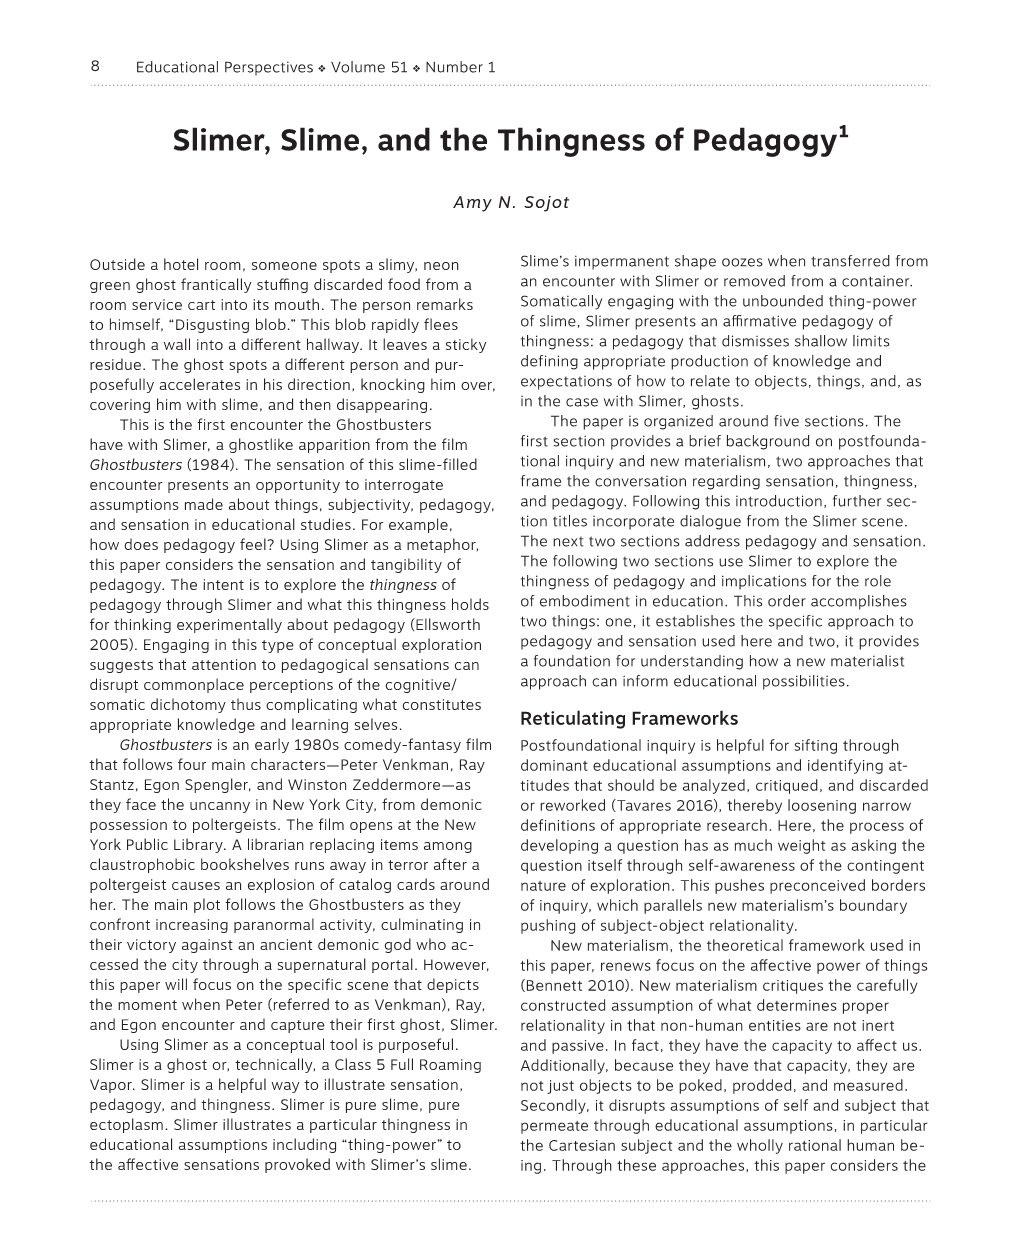 Slimer, Slime, and the Thingness of Pedagogy1